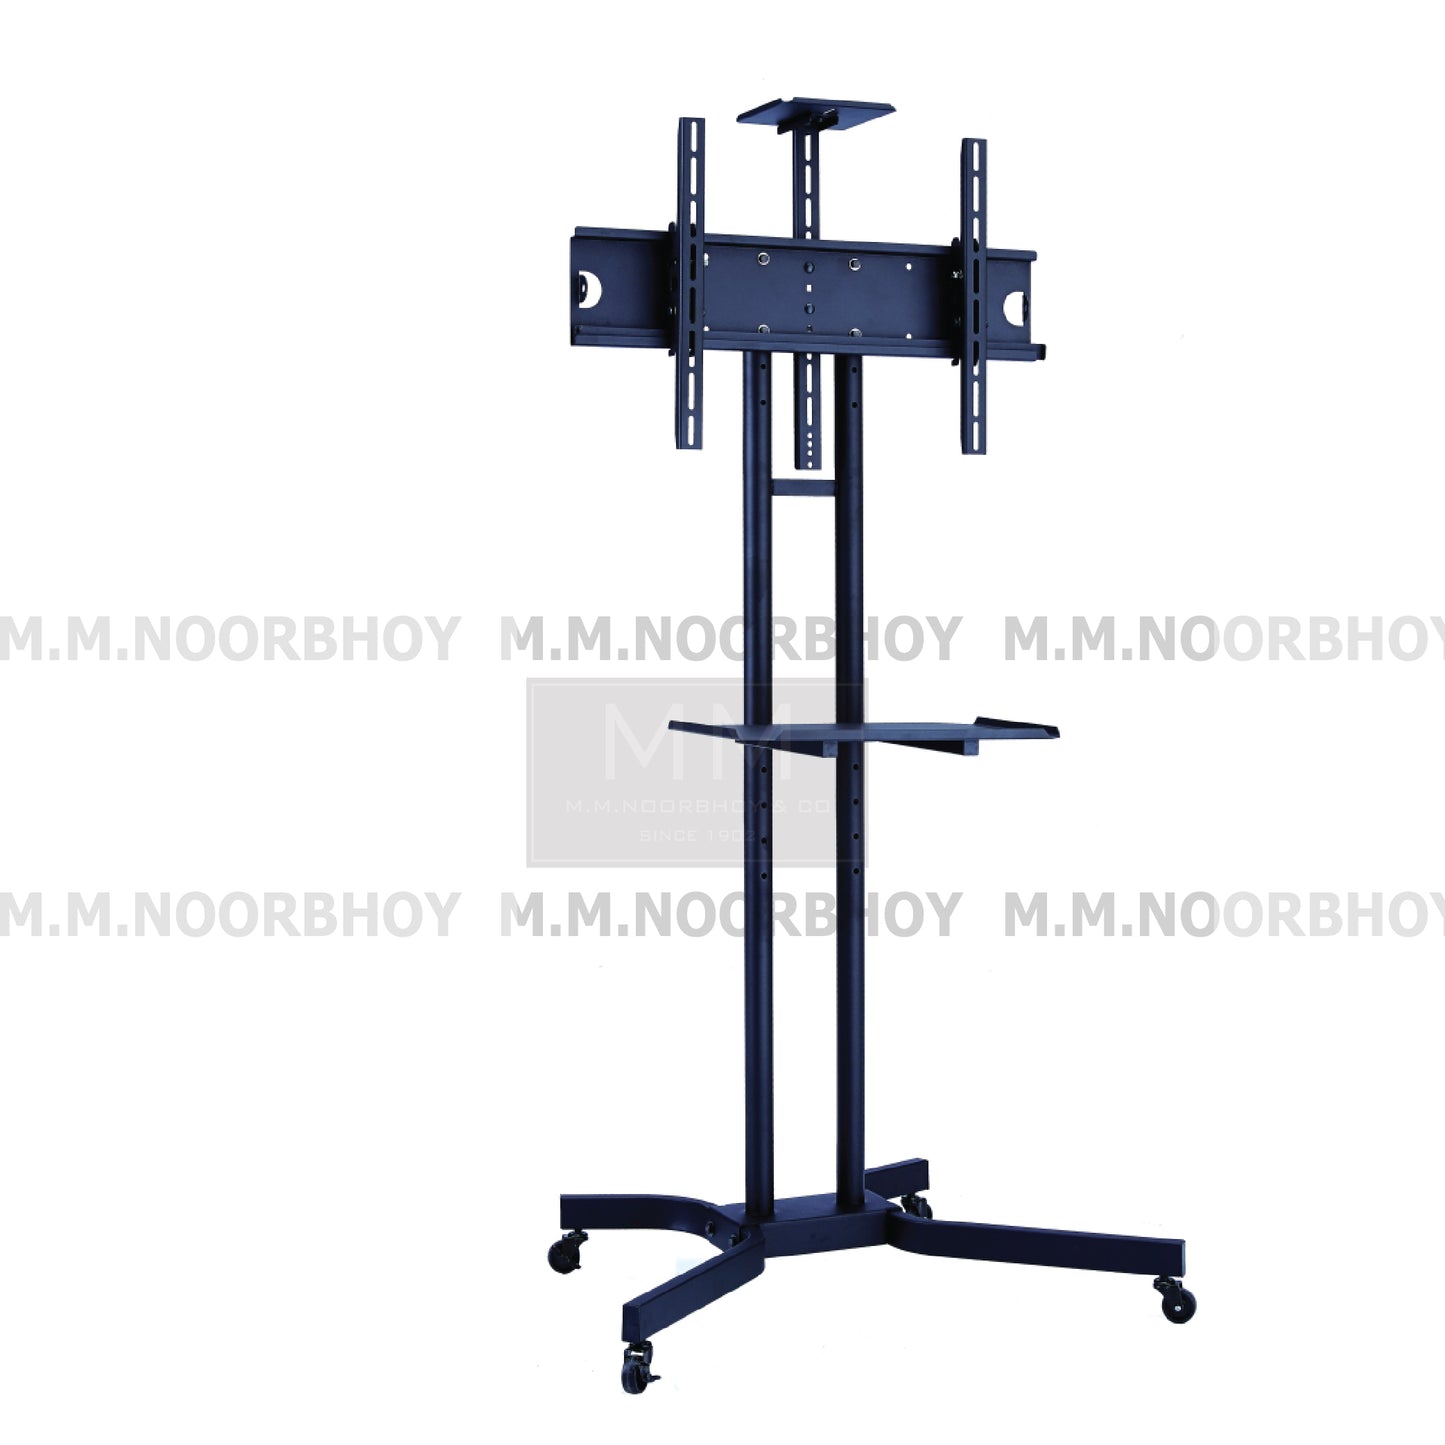 Mcoco Lcd & Led Tv Bracket Floor Stand With 4 Wheels, Tv Size 42" to 60" Black Colour - CMB954